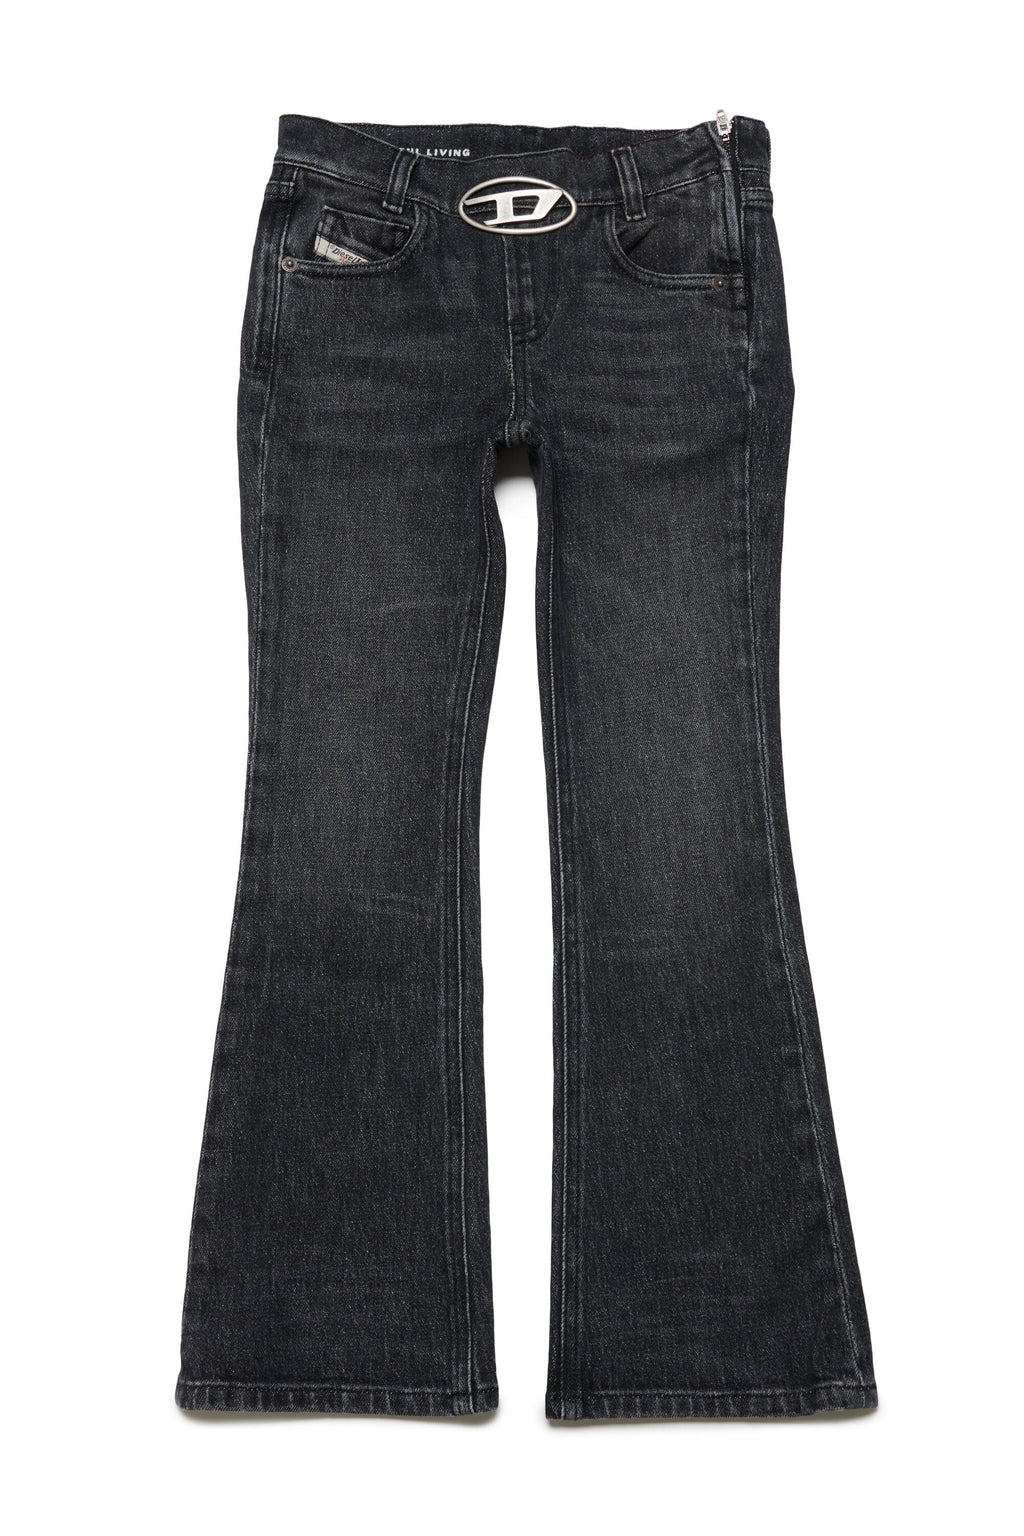 Black bootcut jeans with buckle - 1969 D-Ebbey